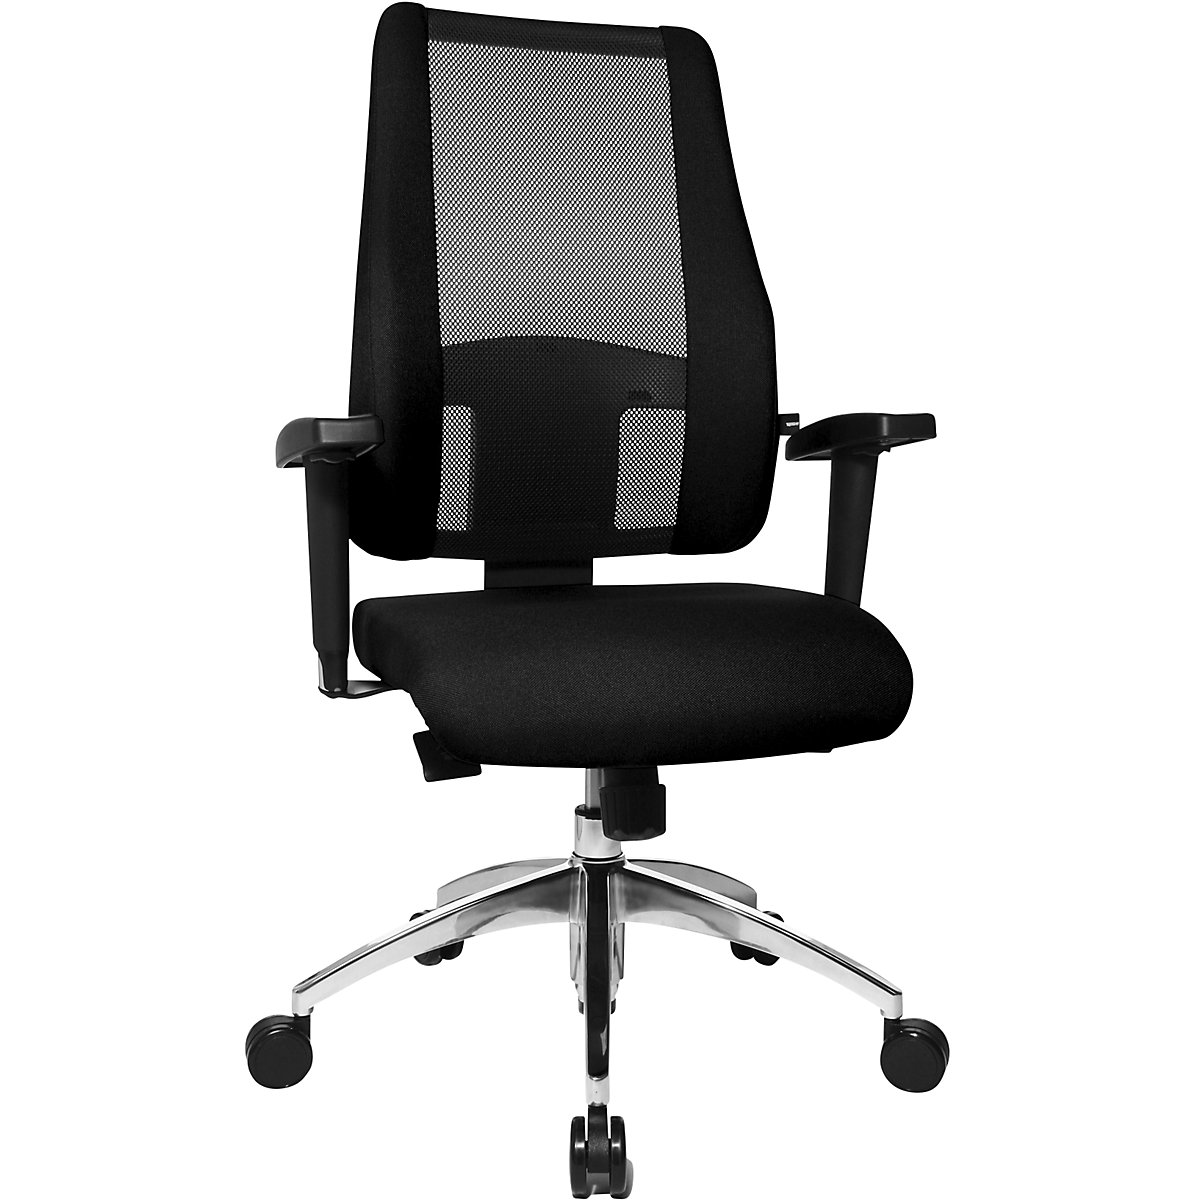 AIR SYNCRO office swivel chair – Topstar, mesh back rest with padded side parts, black / black-8